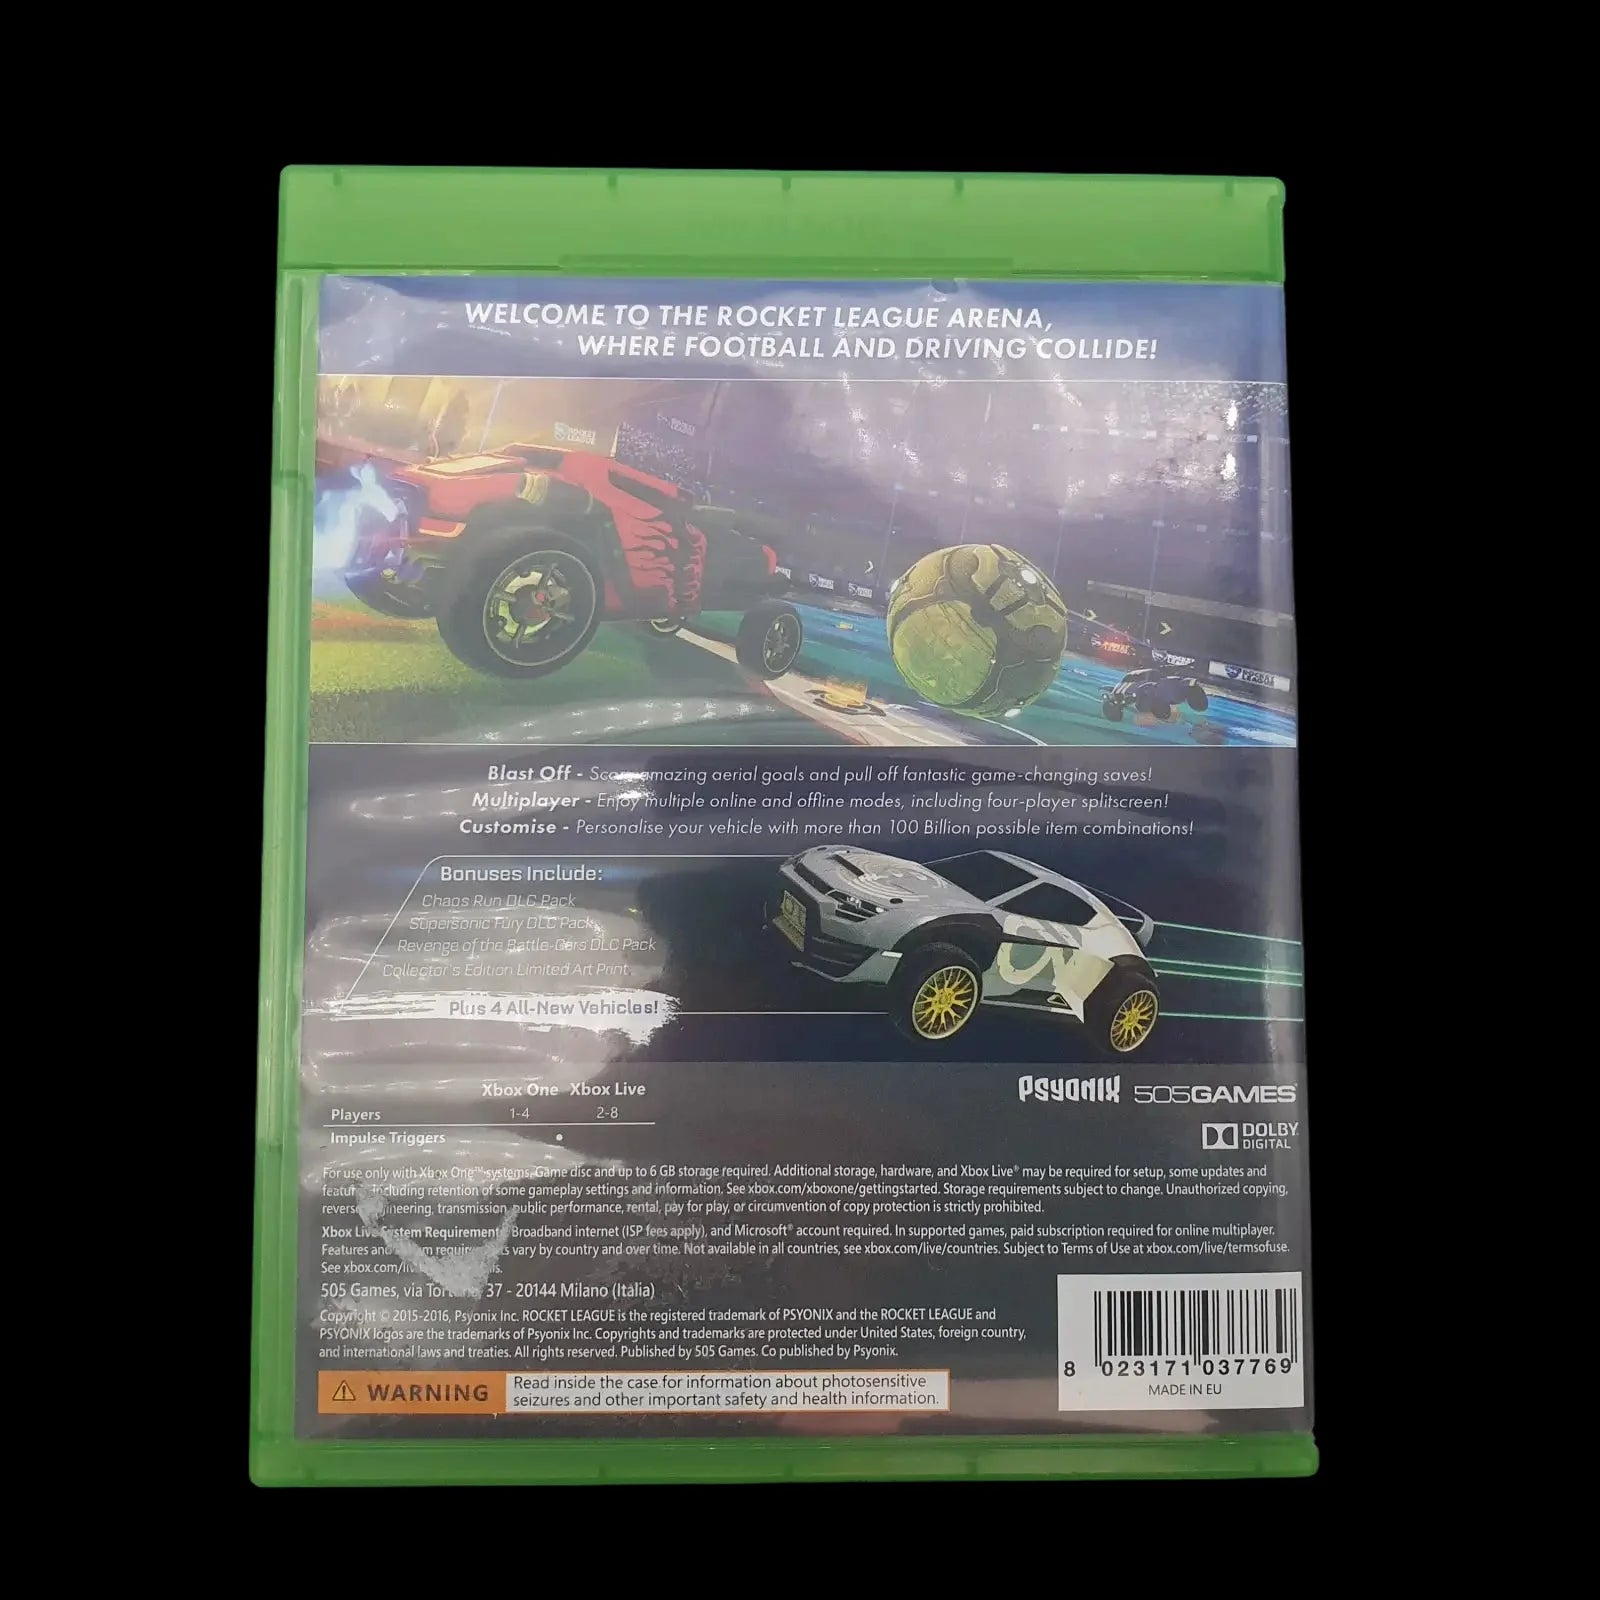 Rocket League Microsoft Xbox One 505 Games 2016 Video Game